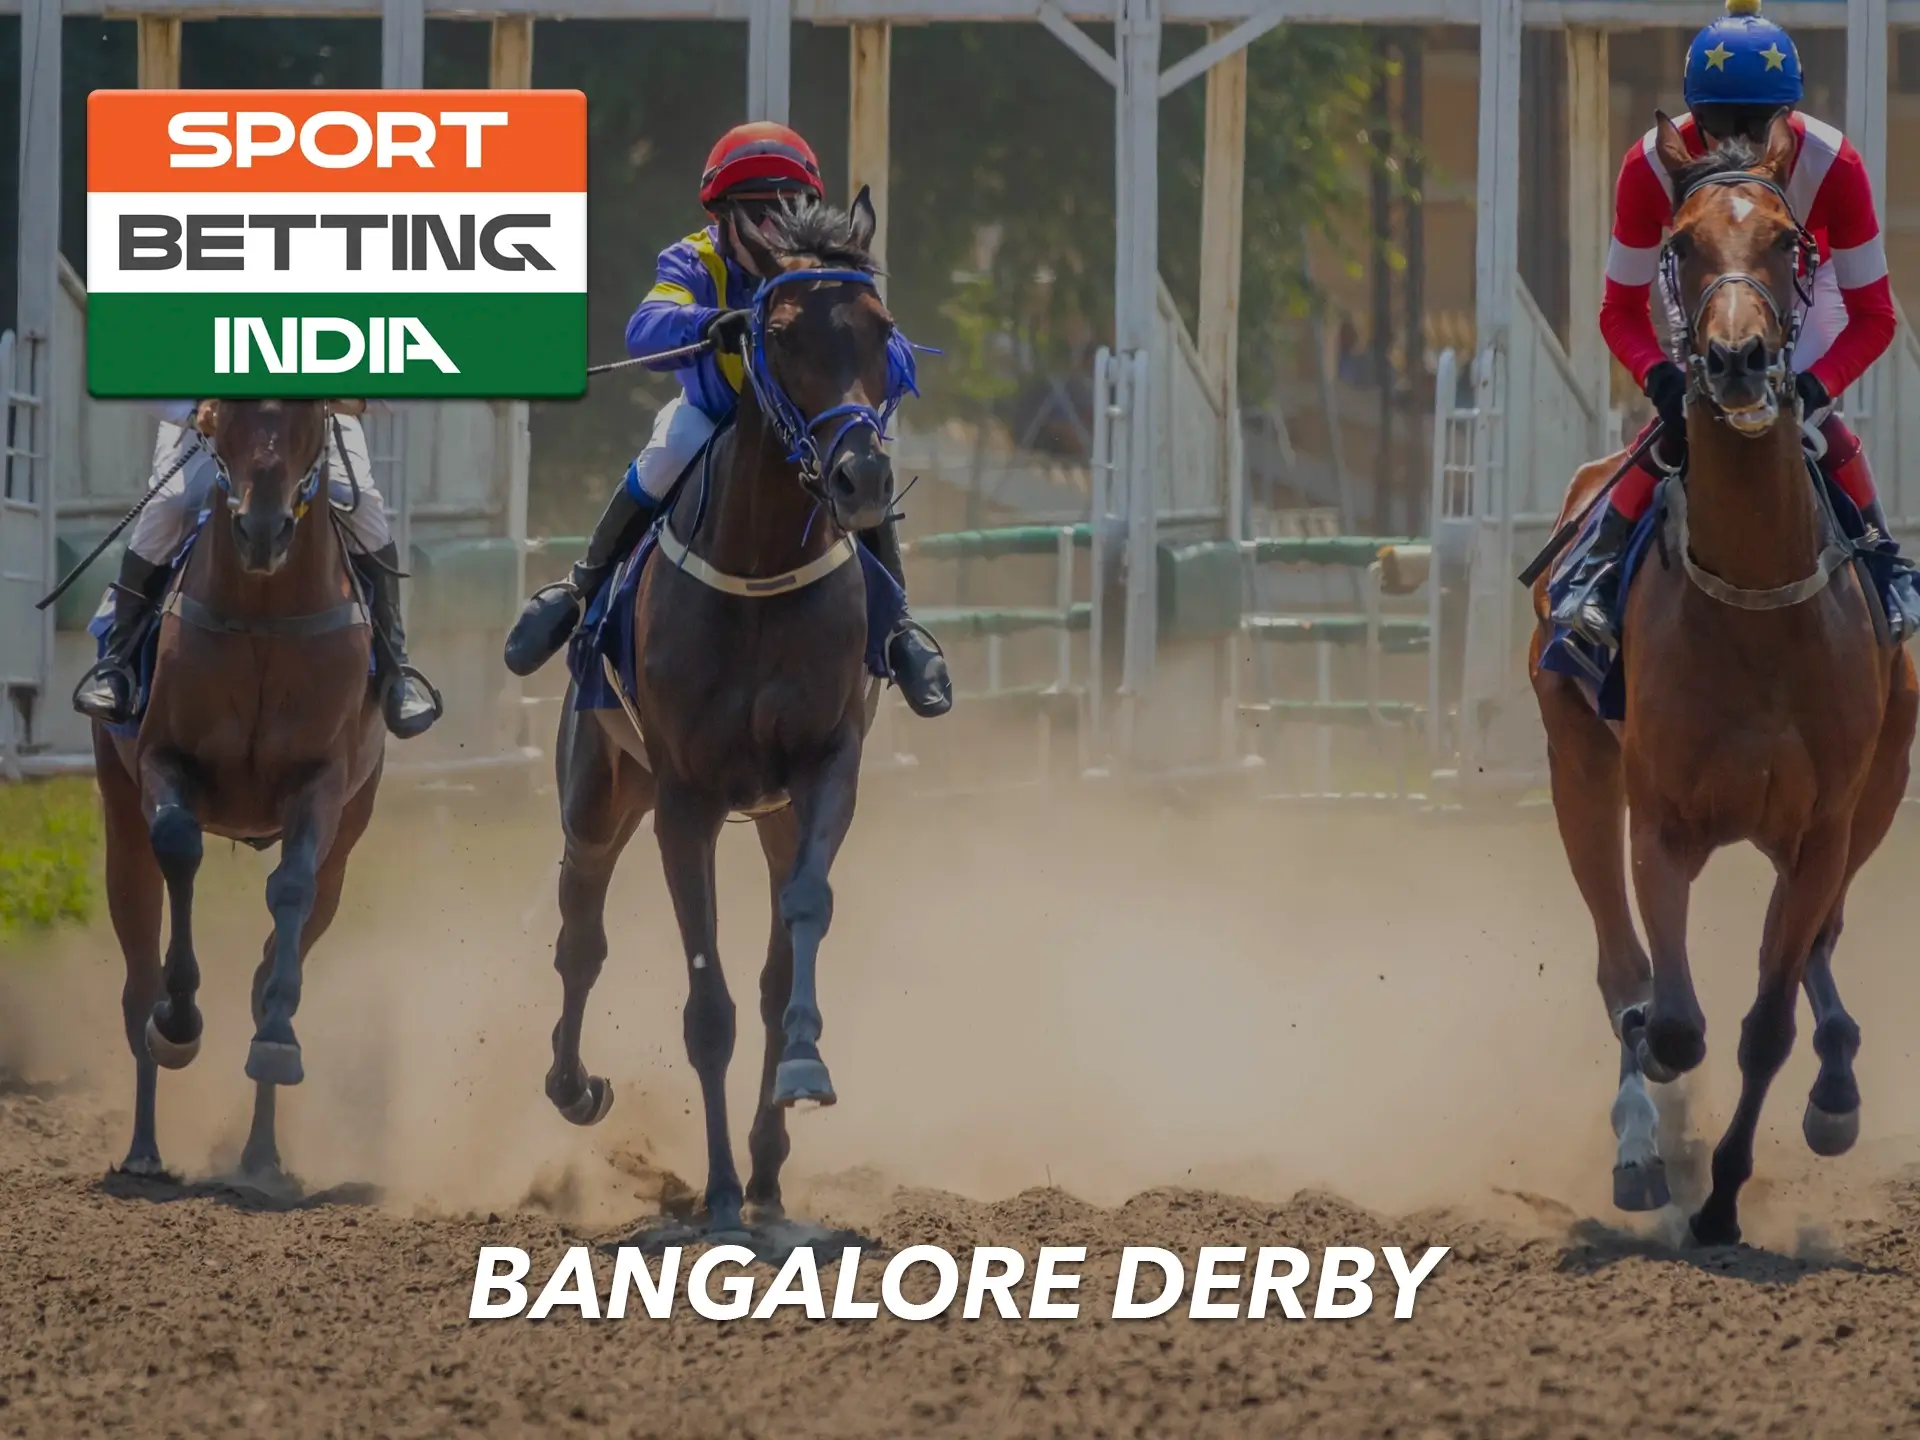 Bangalore Derby is a particular favourite for betting amongst users in India.